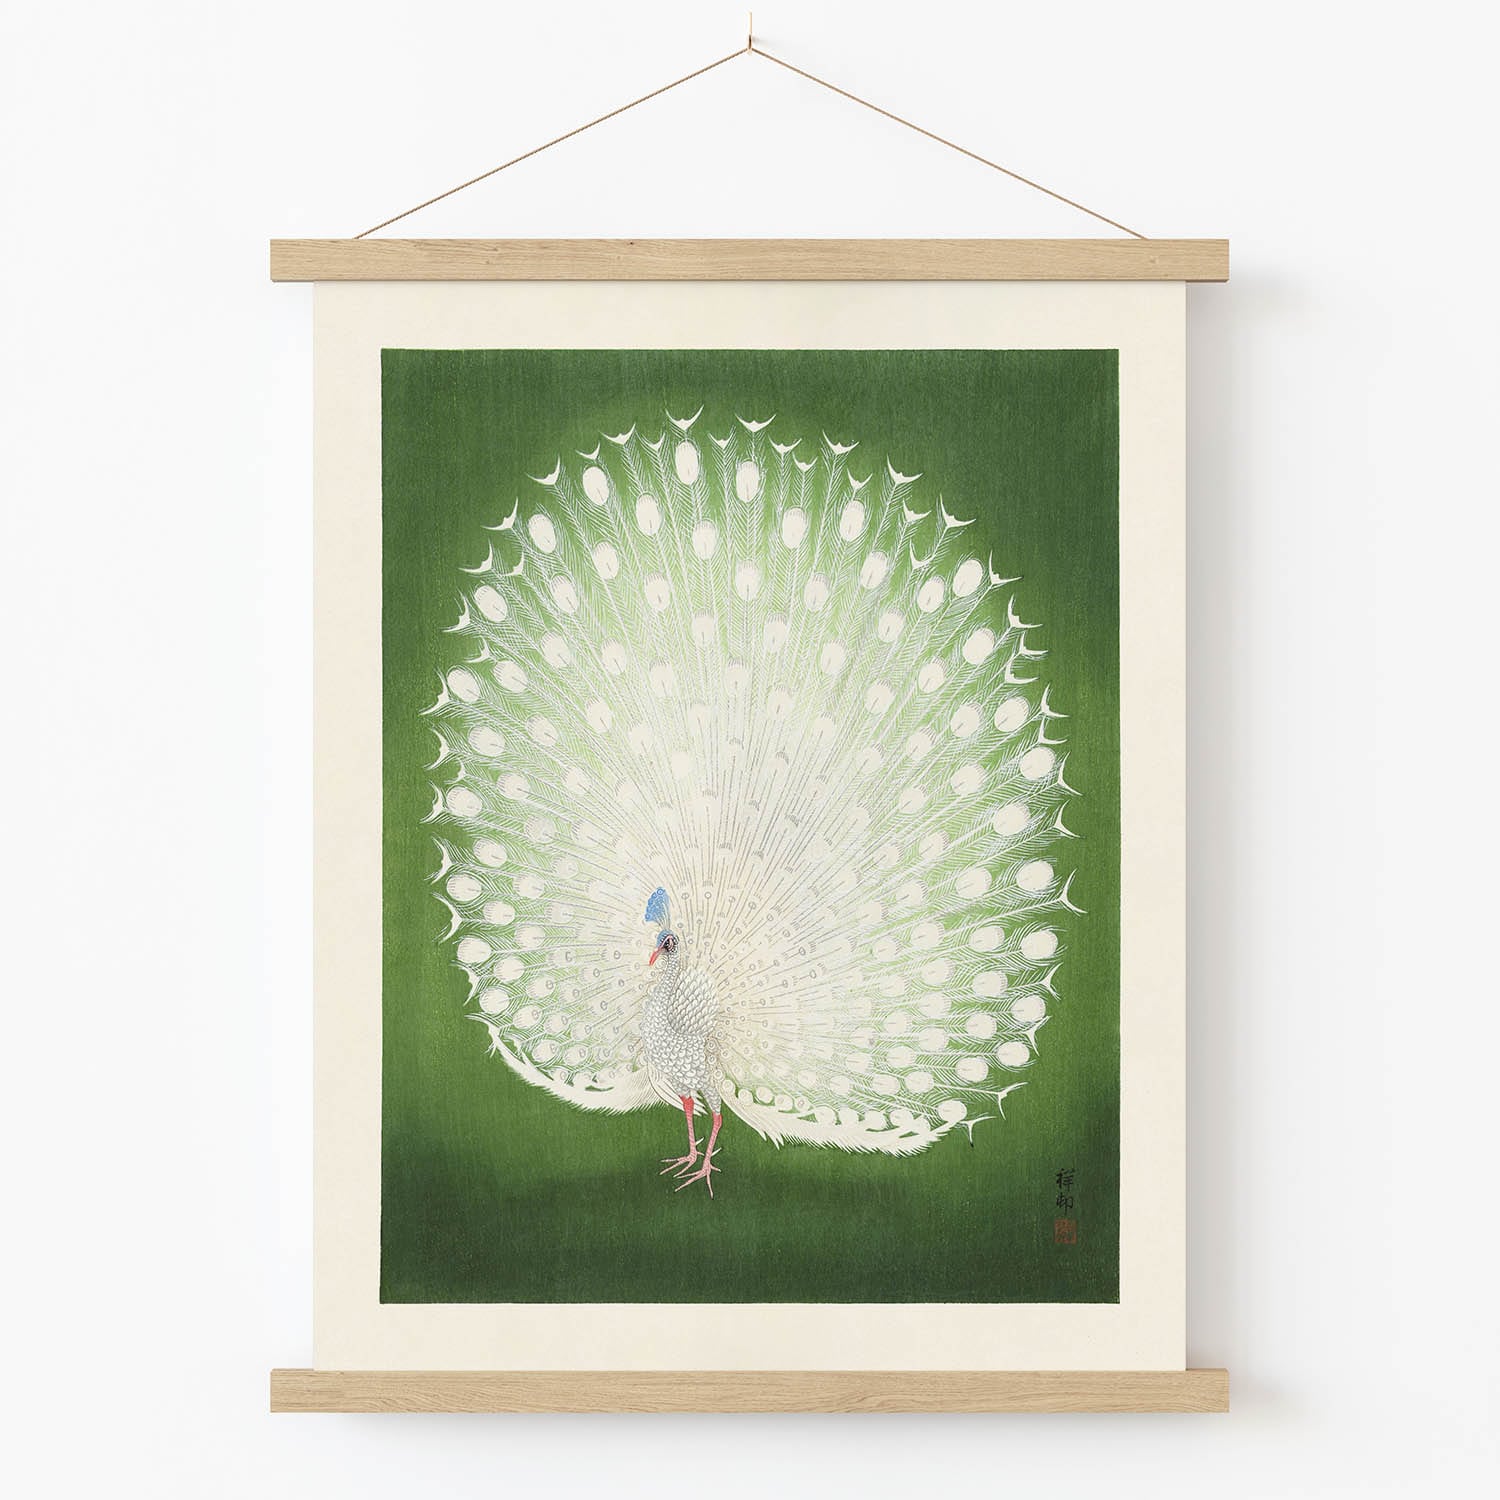 Emerald Green and White Peacock Art Print in Wood Hanger Frame on Wall